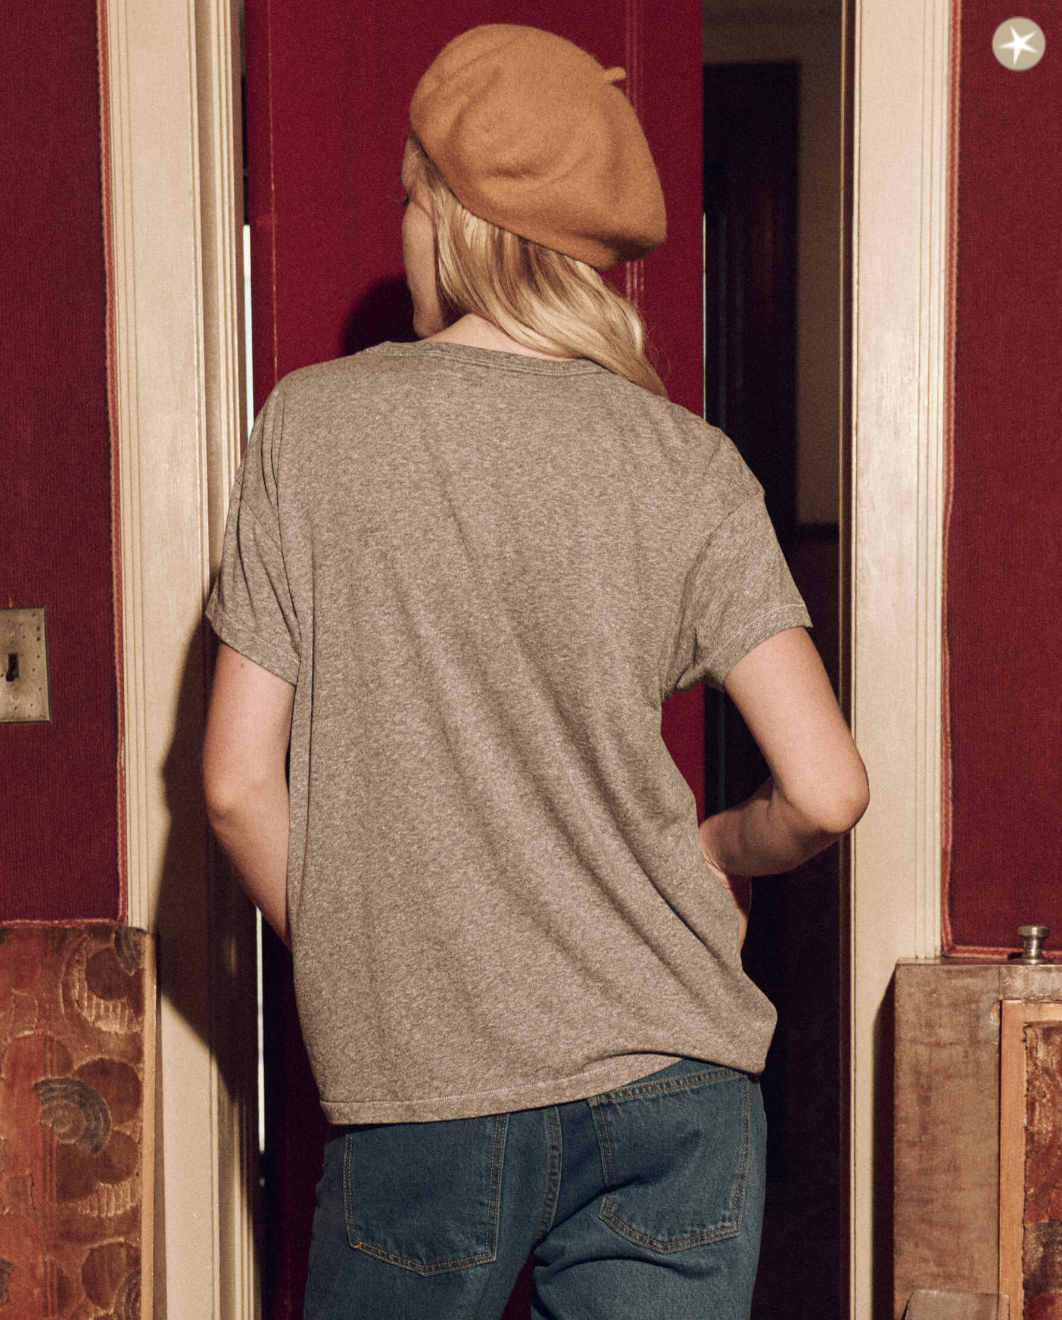 A person standing with their back to the camera, wearing The Boxy Crew w/ Perched Cardinal t-shirt by The Great Inc., blue jeans, and a tan beret, is seen entering a bungalow with red walls and a vintage feel.